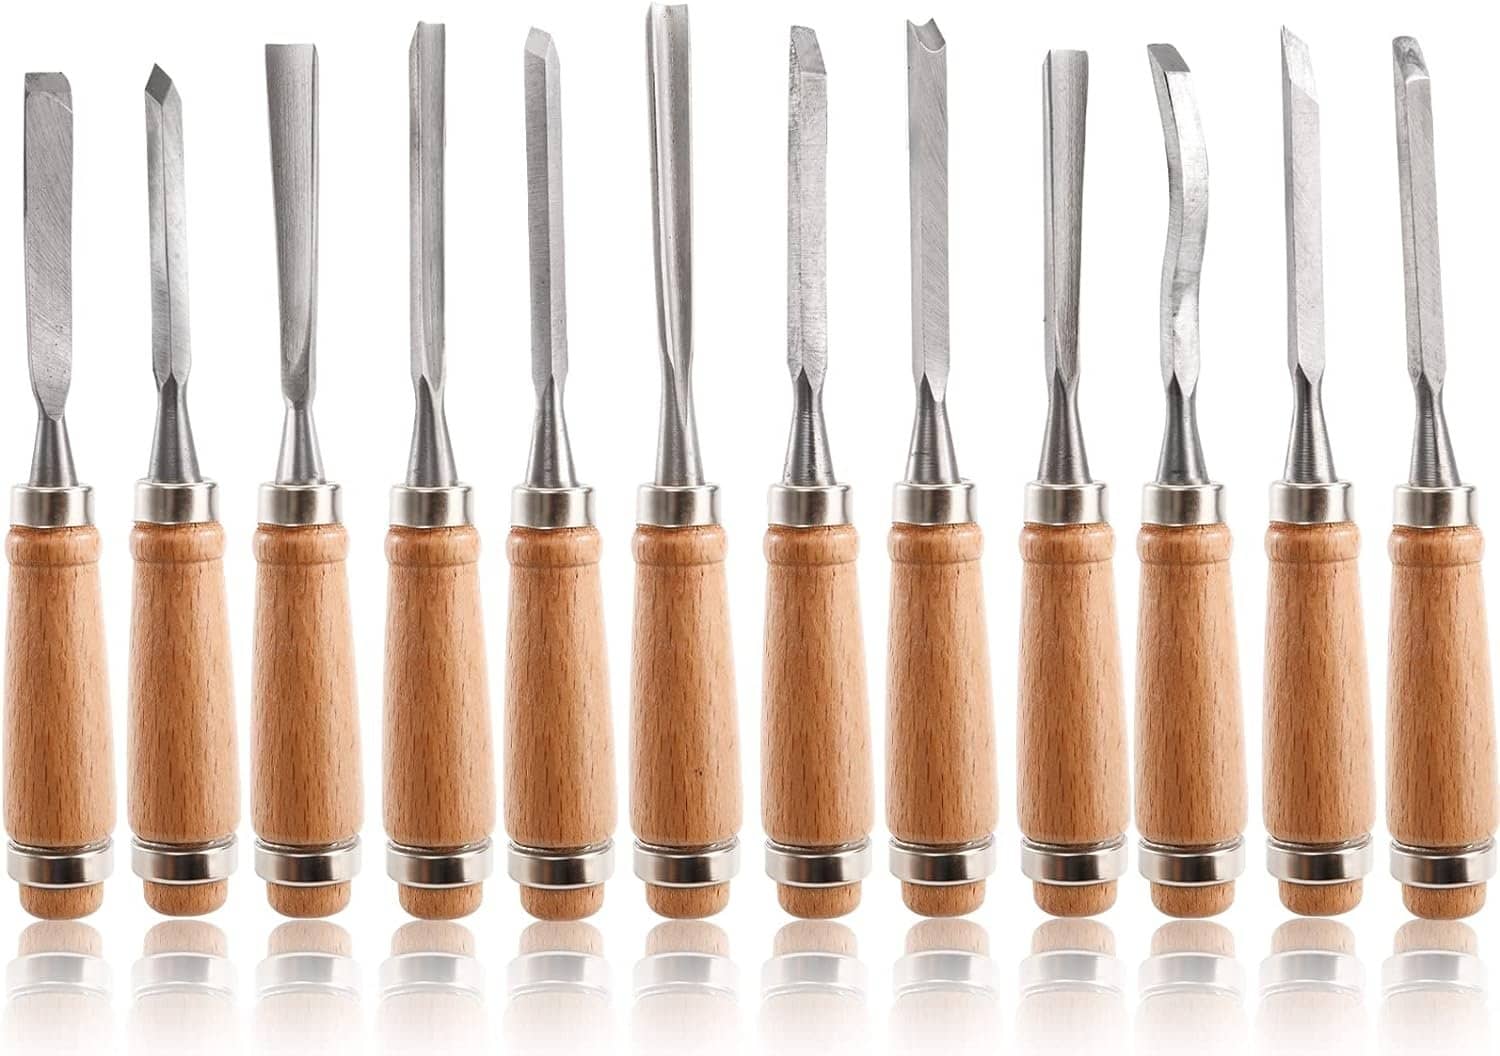 dicunoy wood carving tools review